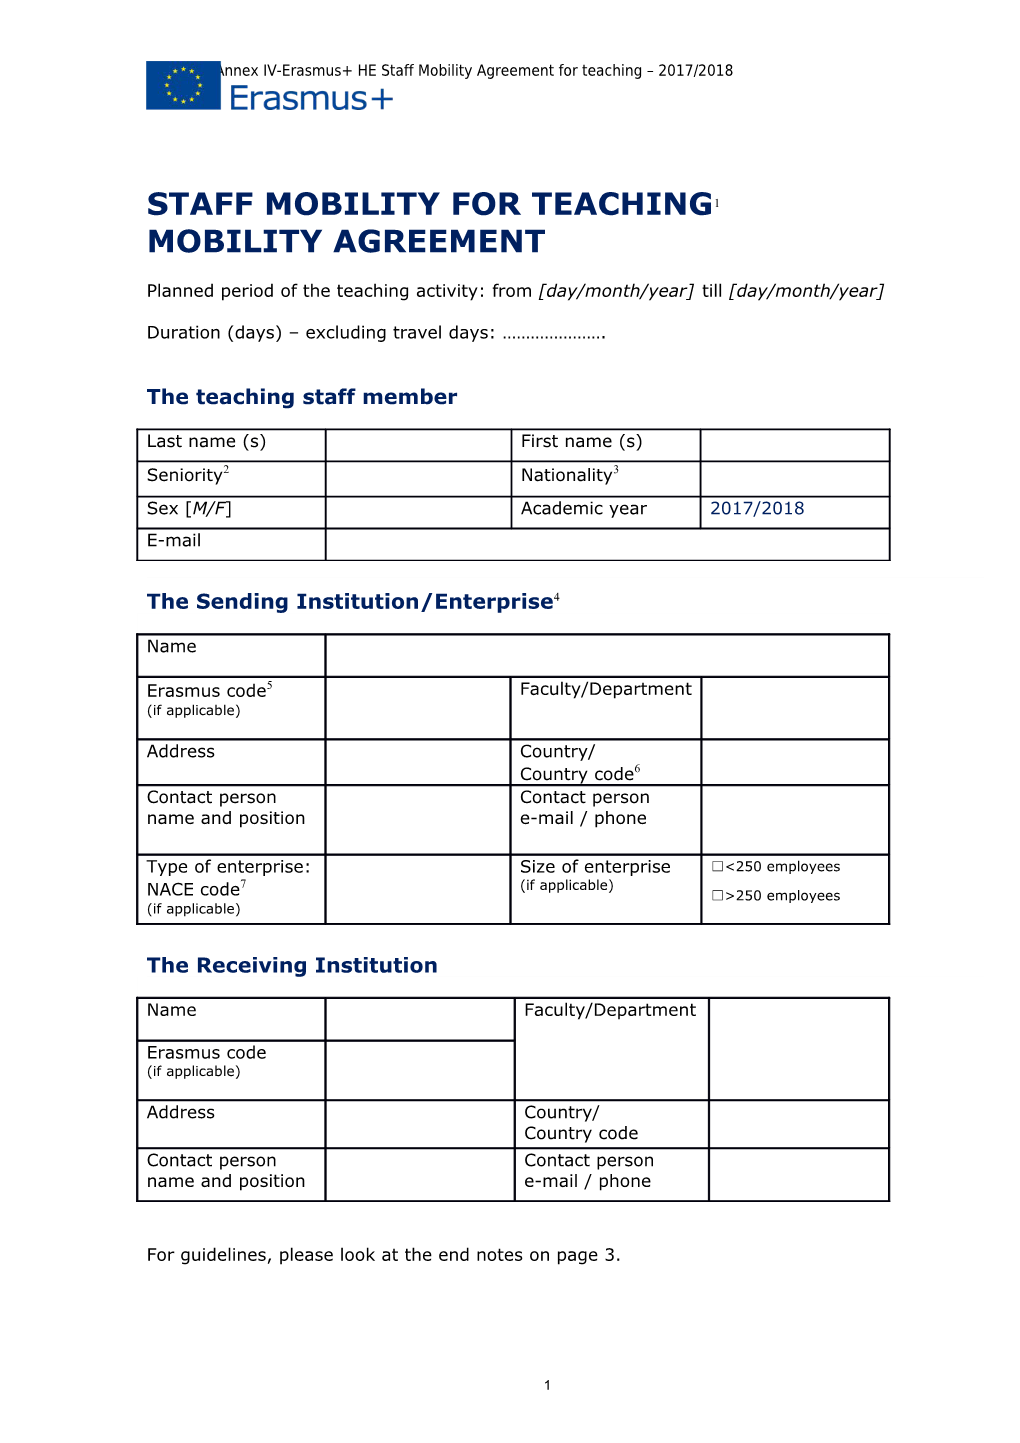 Gfna-II-C-Annex IV-Erasmus+ HE Staff Mobility Agreement for Teaching 2017/2018